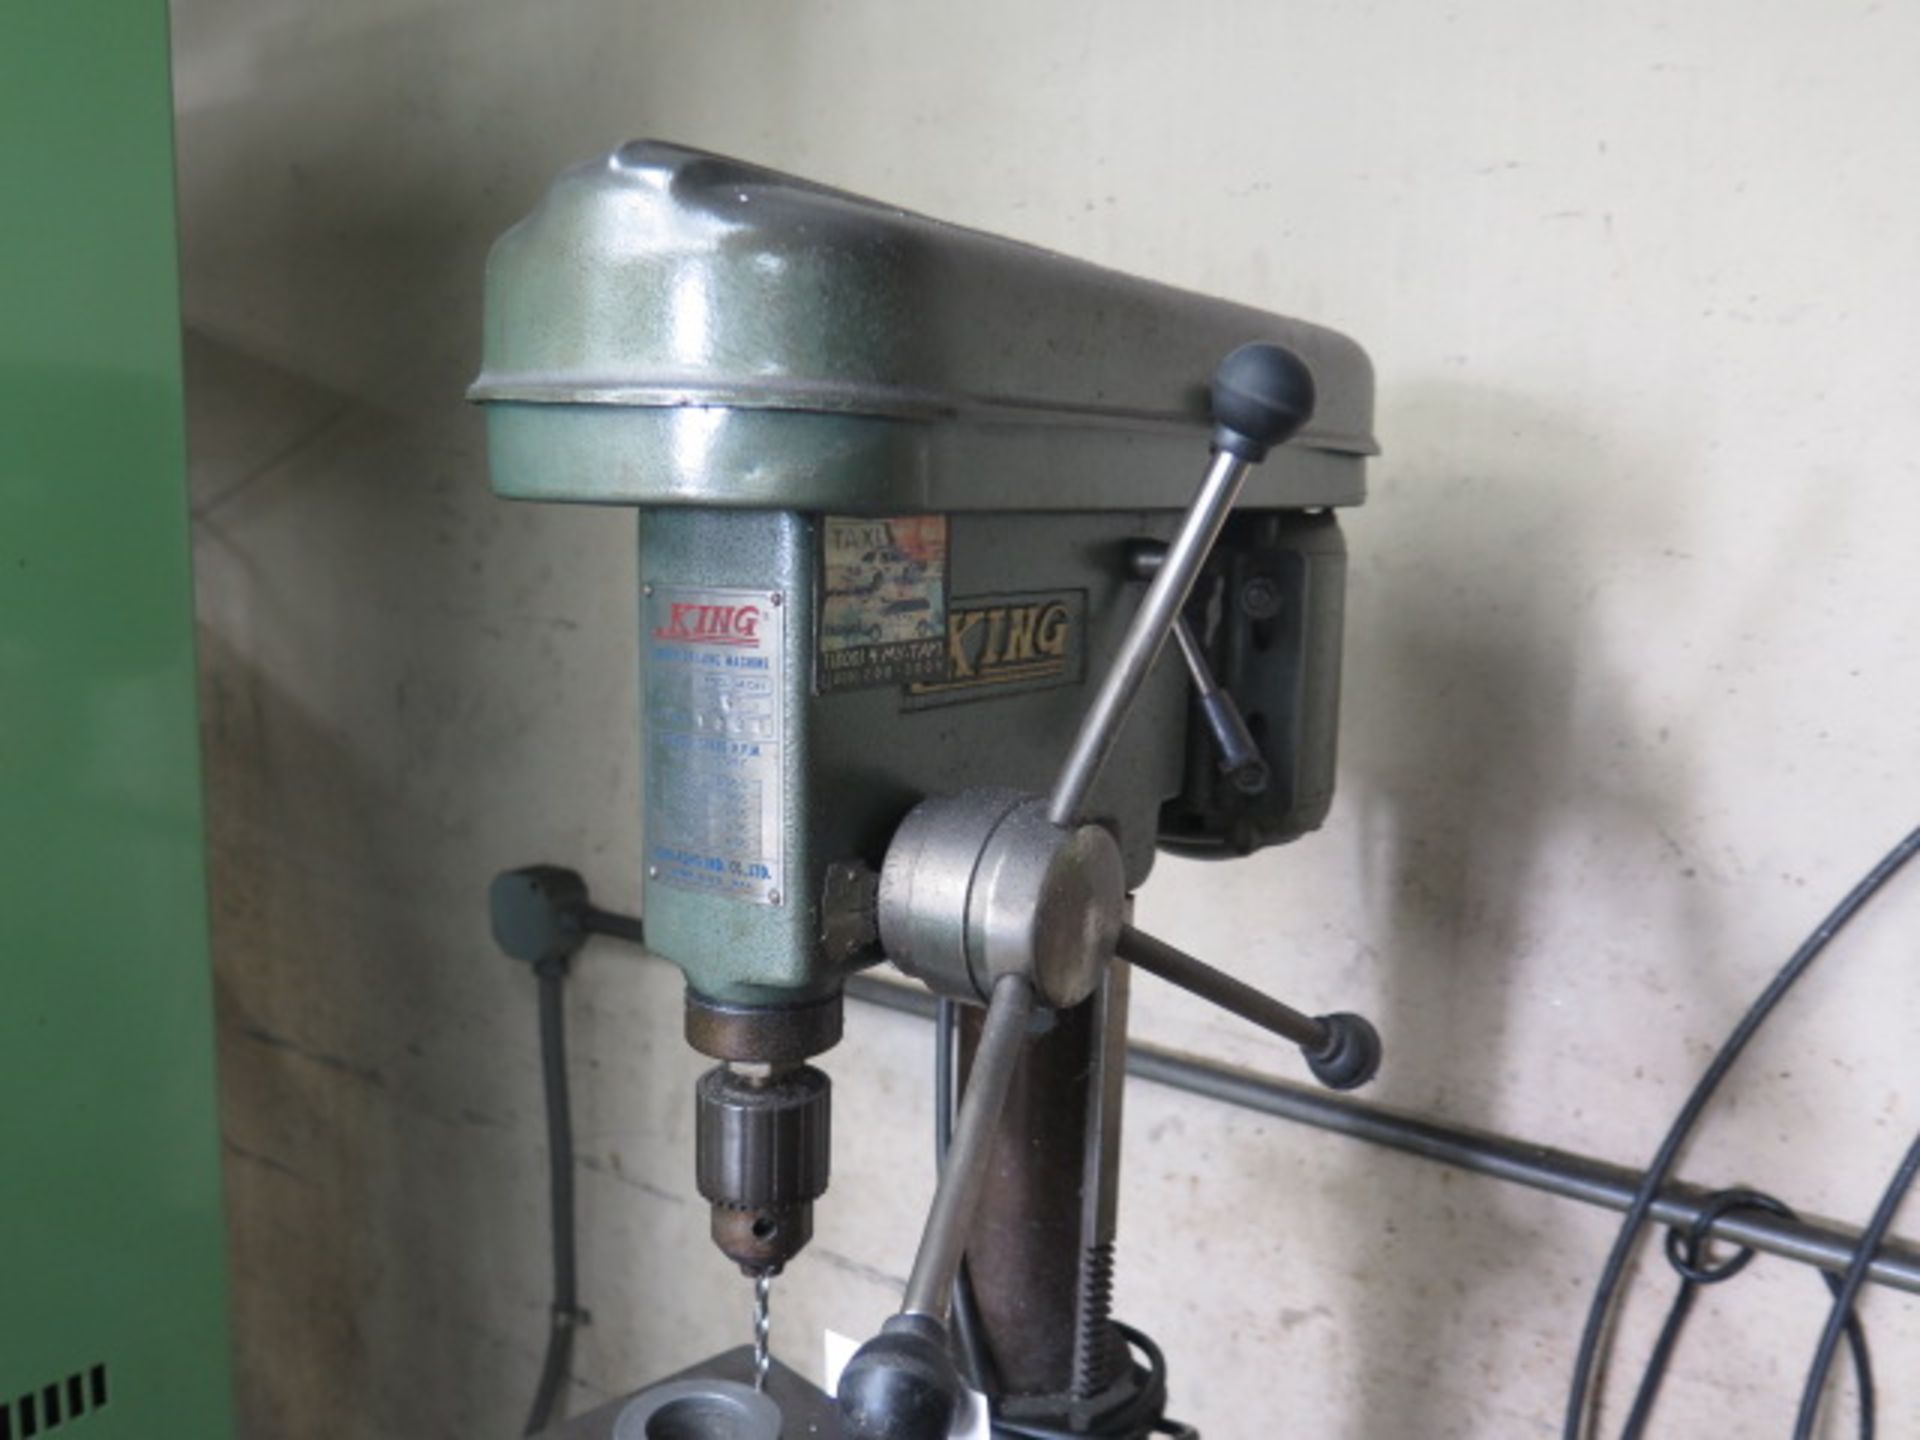 King Bench Model Drill Press w/ Bench (SOLD AS-IS - NO WARRANTY) - Image 3 of 6